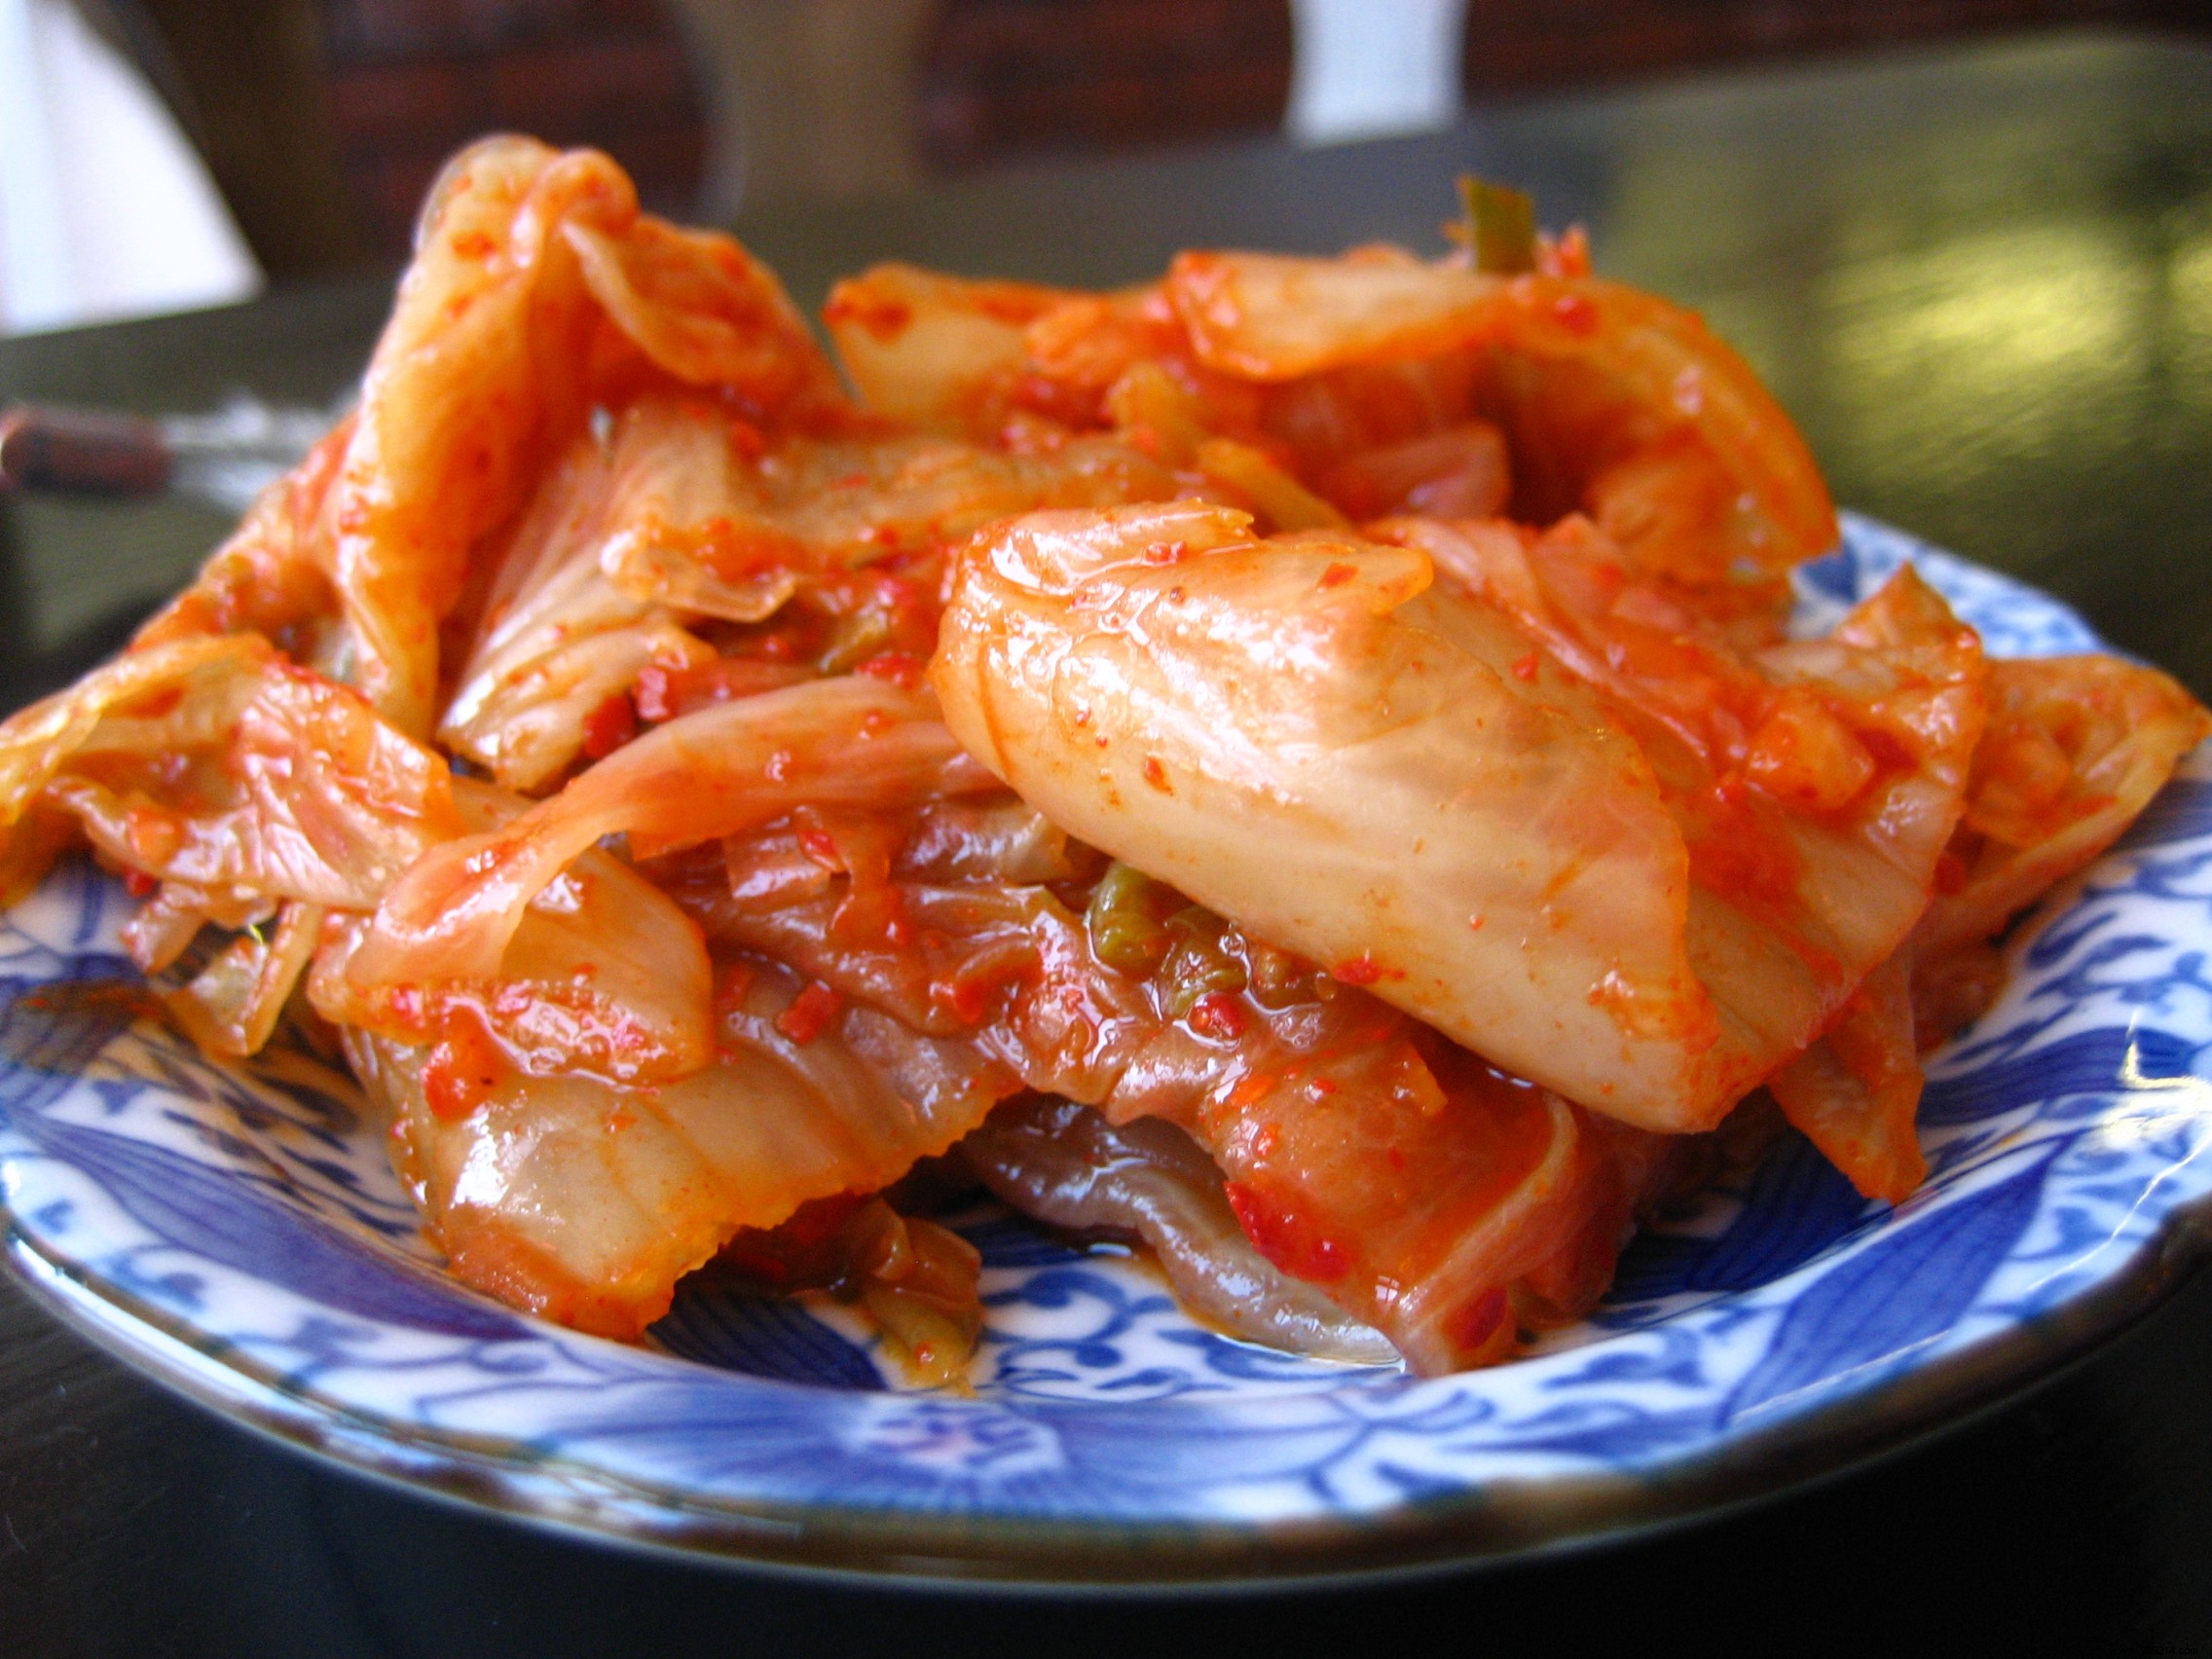 Fermented foods boost microbiome diversity and improve immune responses 